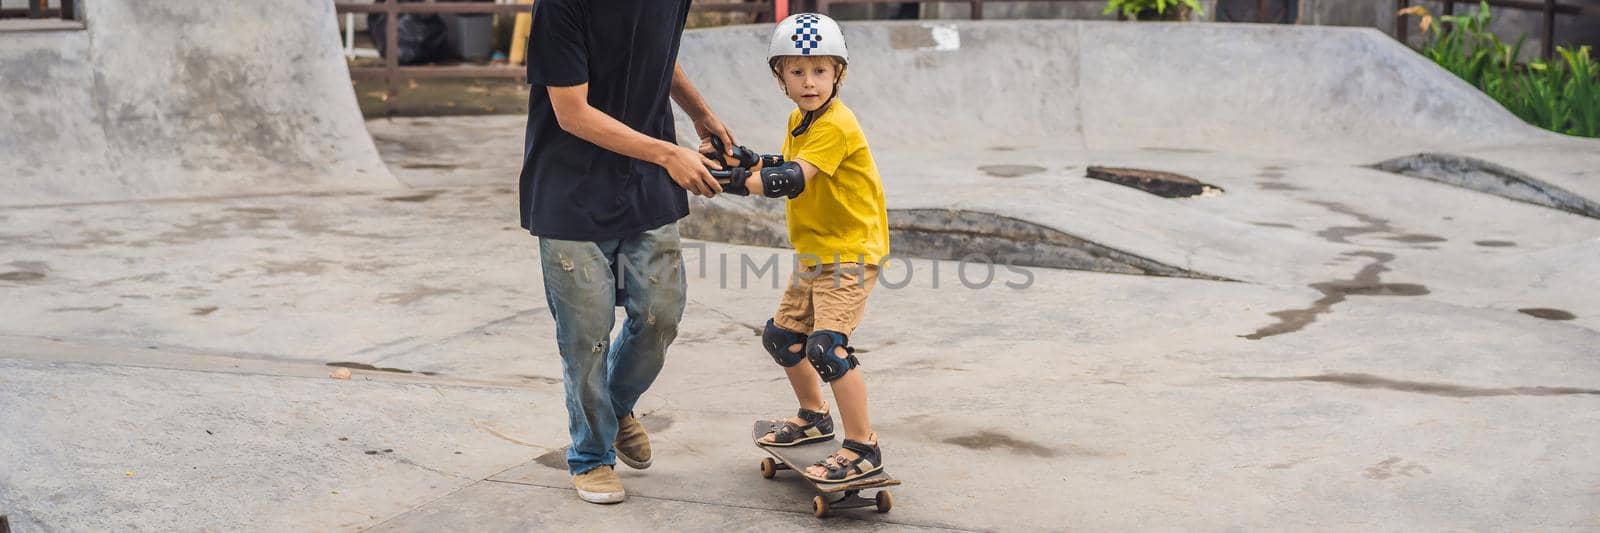 Athletic boy learns to skateboard with asian trainer in a skate park. Children education, sports. Race diversity. BANNER, LONG FORMAT